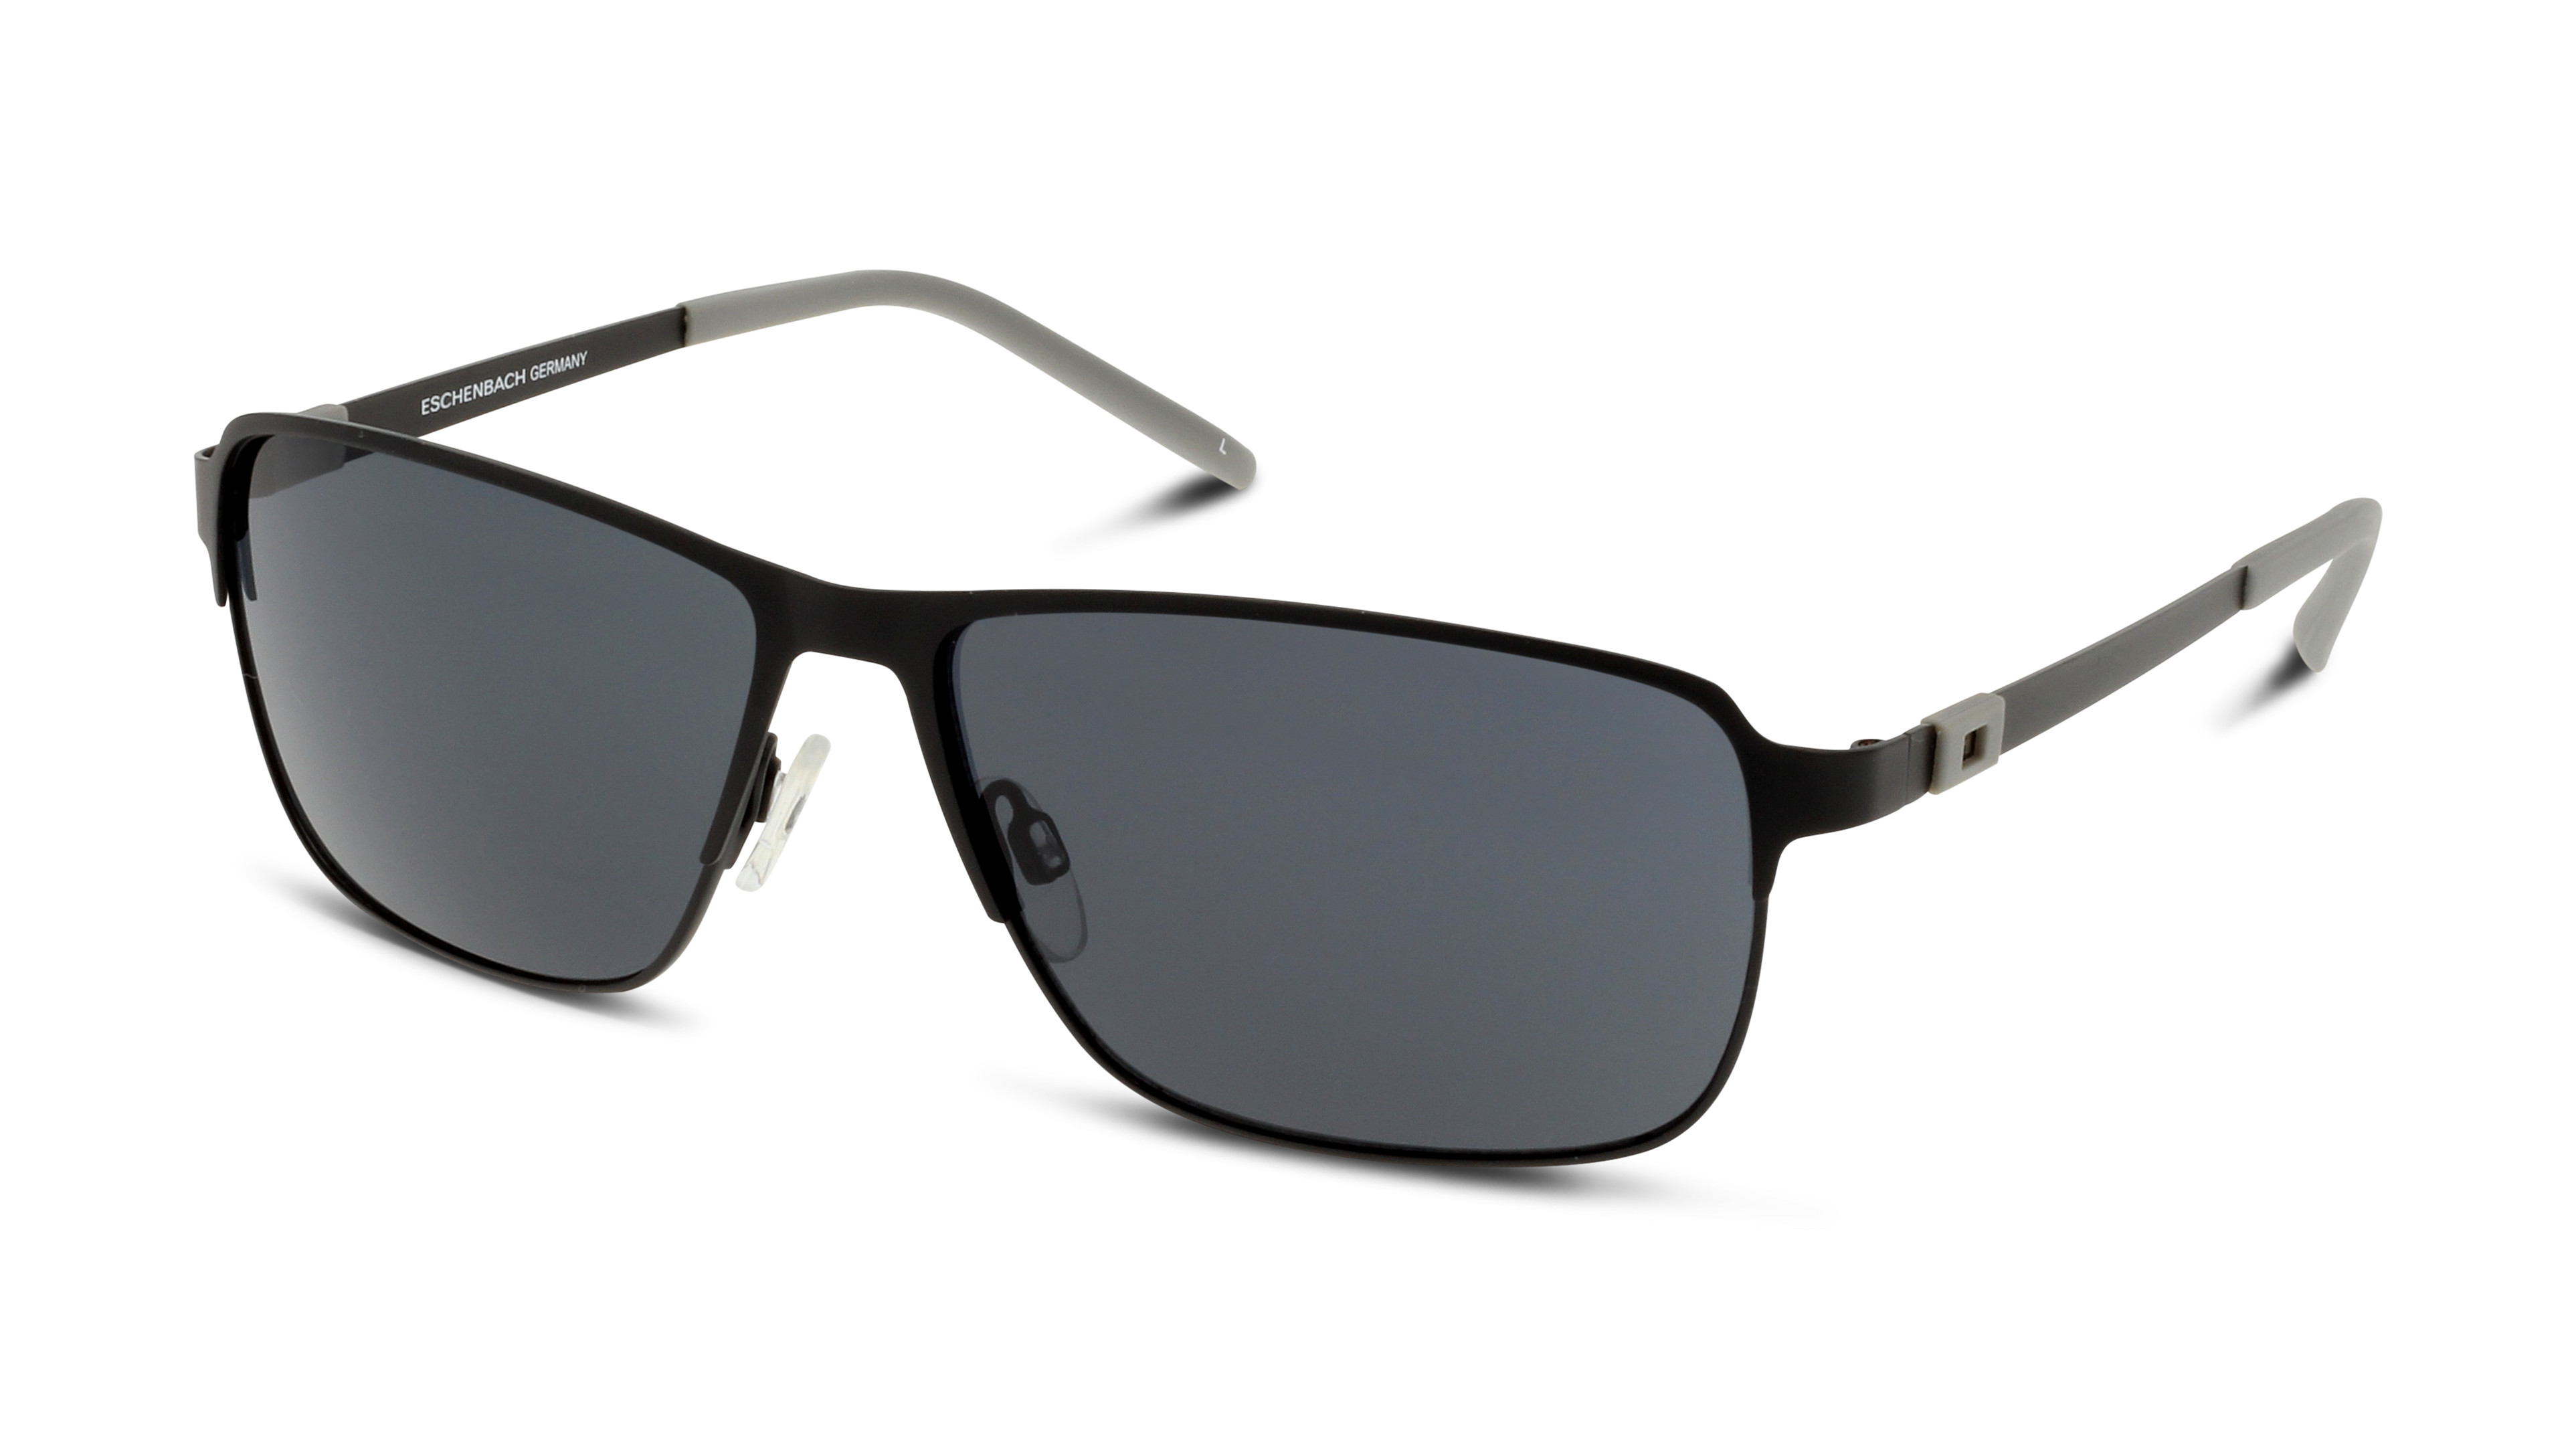 [products.image.angle_left01] HUMPHREY´S eyewear 585225 101030 Sonnenbrille